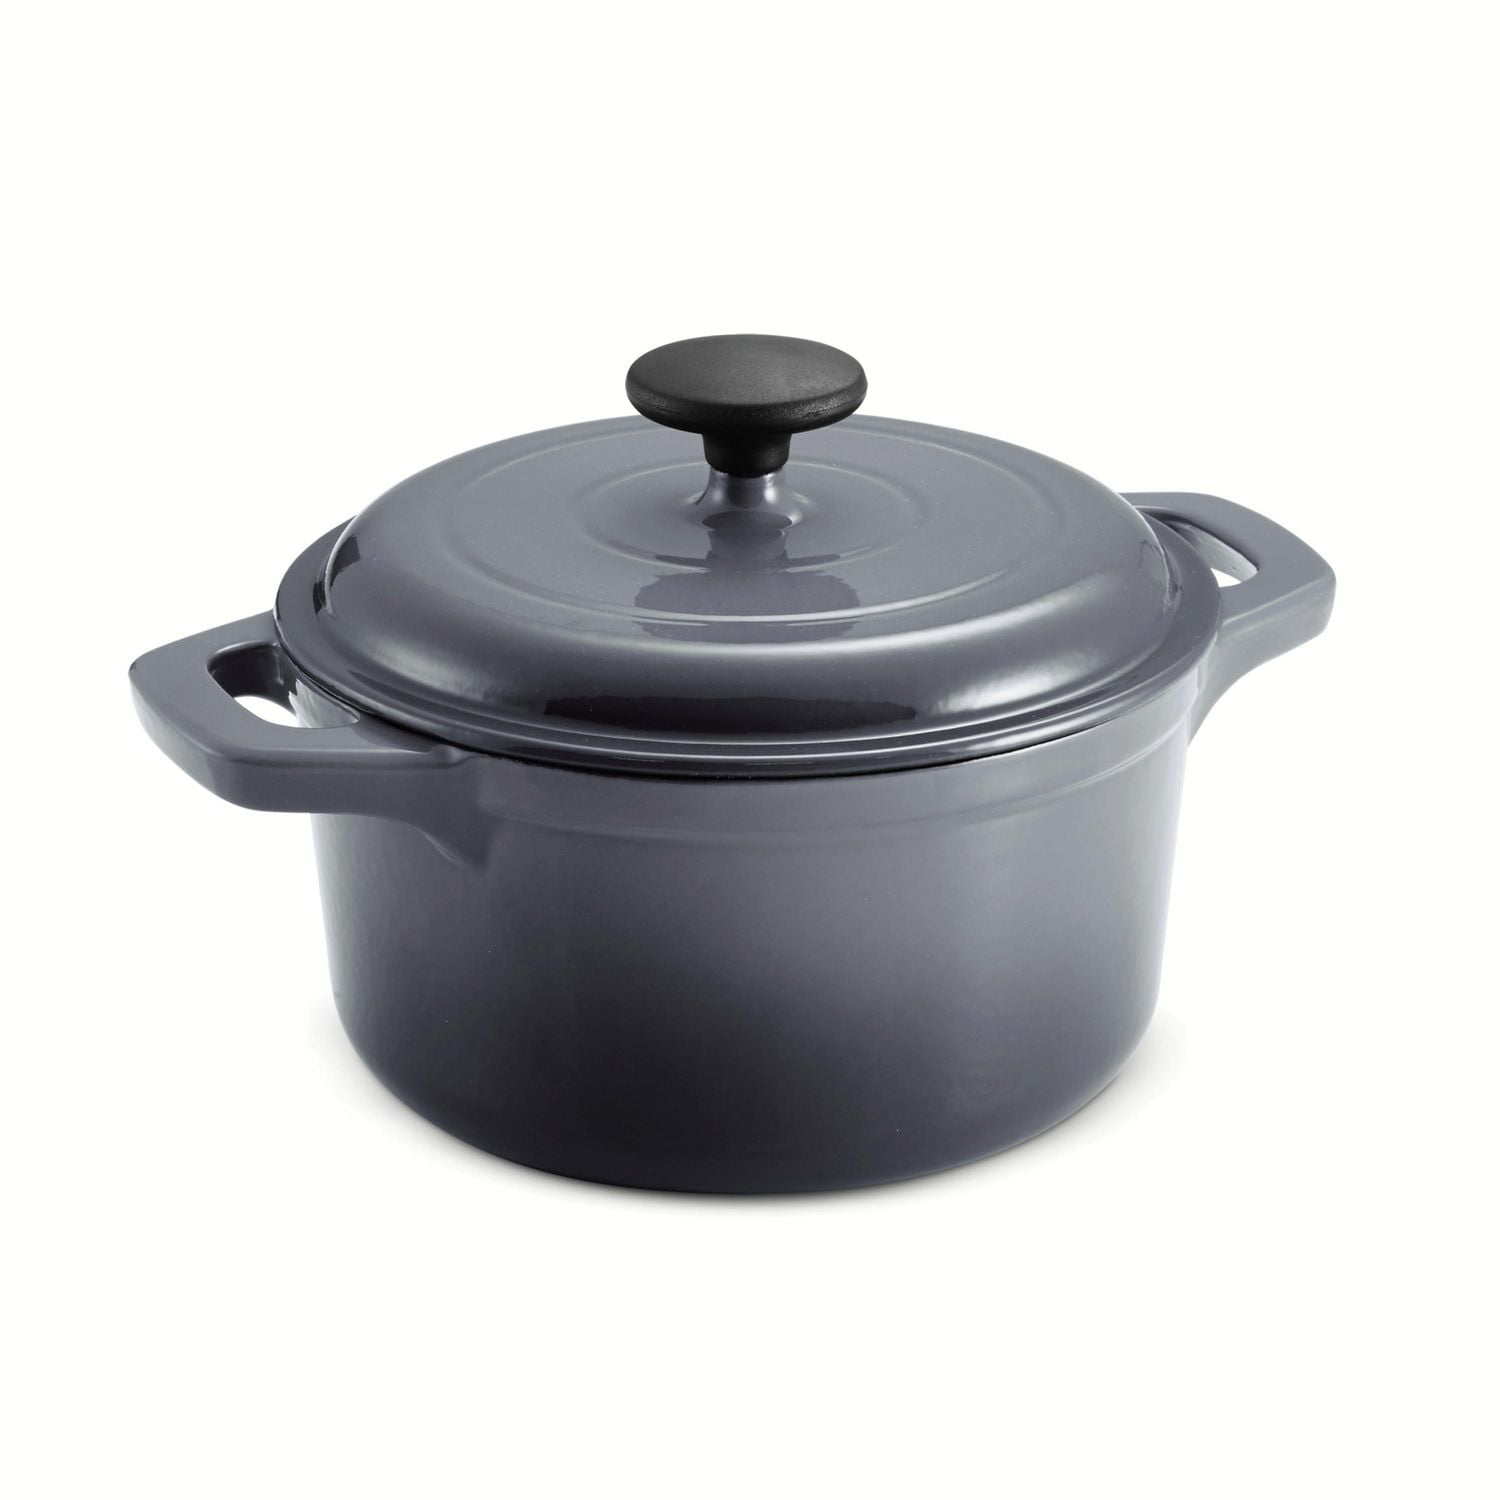 Mainstays Enameled Cast Iron 4.75 QT Dutch Oven with Lid, Green 